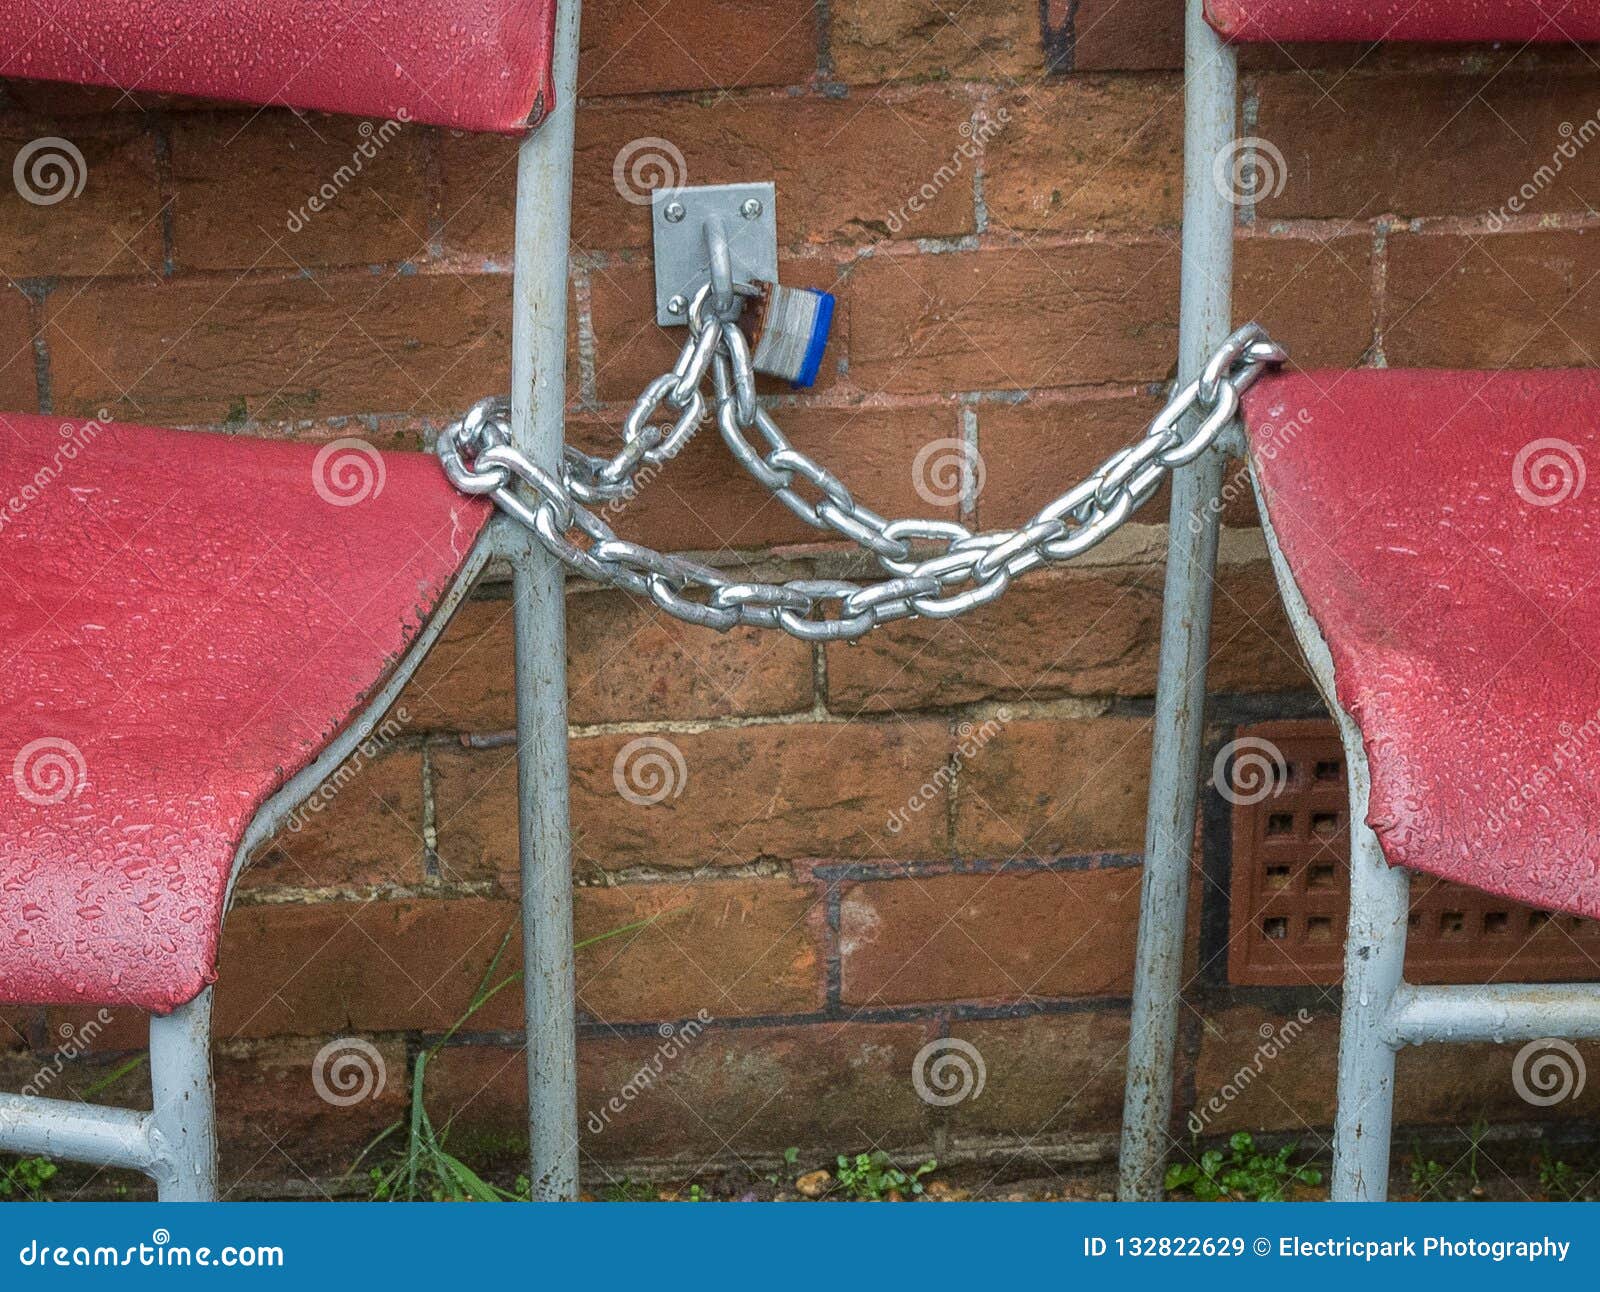 chained chairs Girls getting their vibrated to pussy while